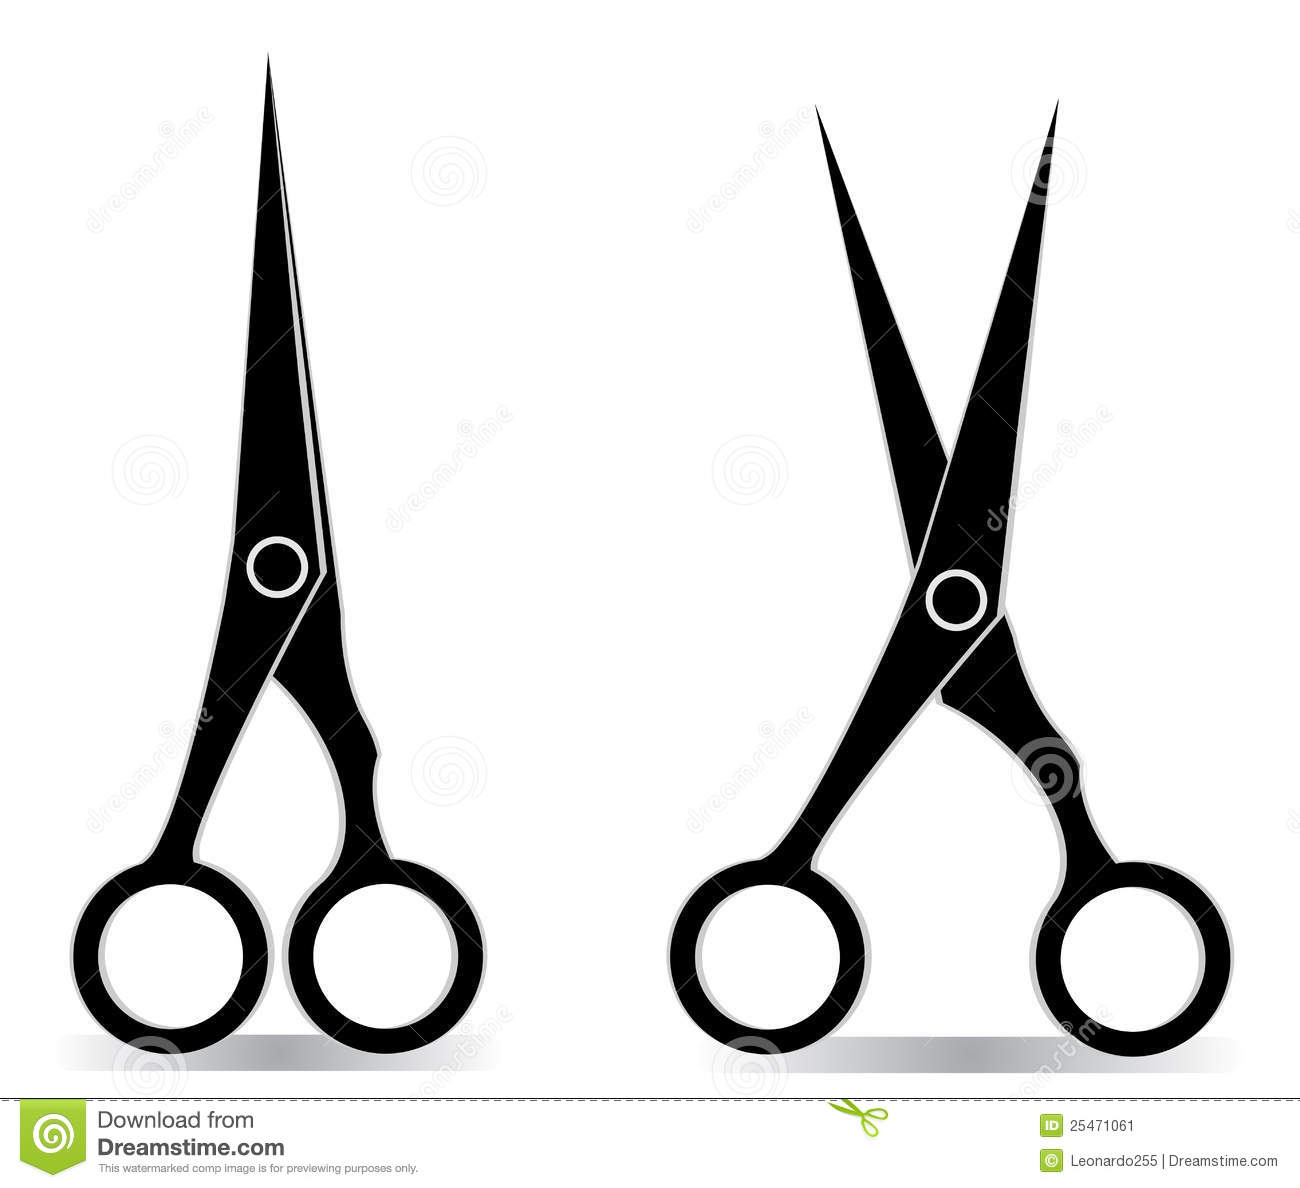 Scissors Black And White   Clipart Panda   Free Clipart Images